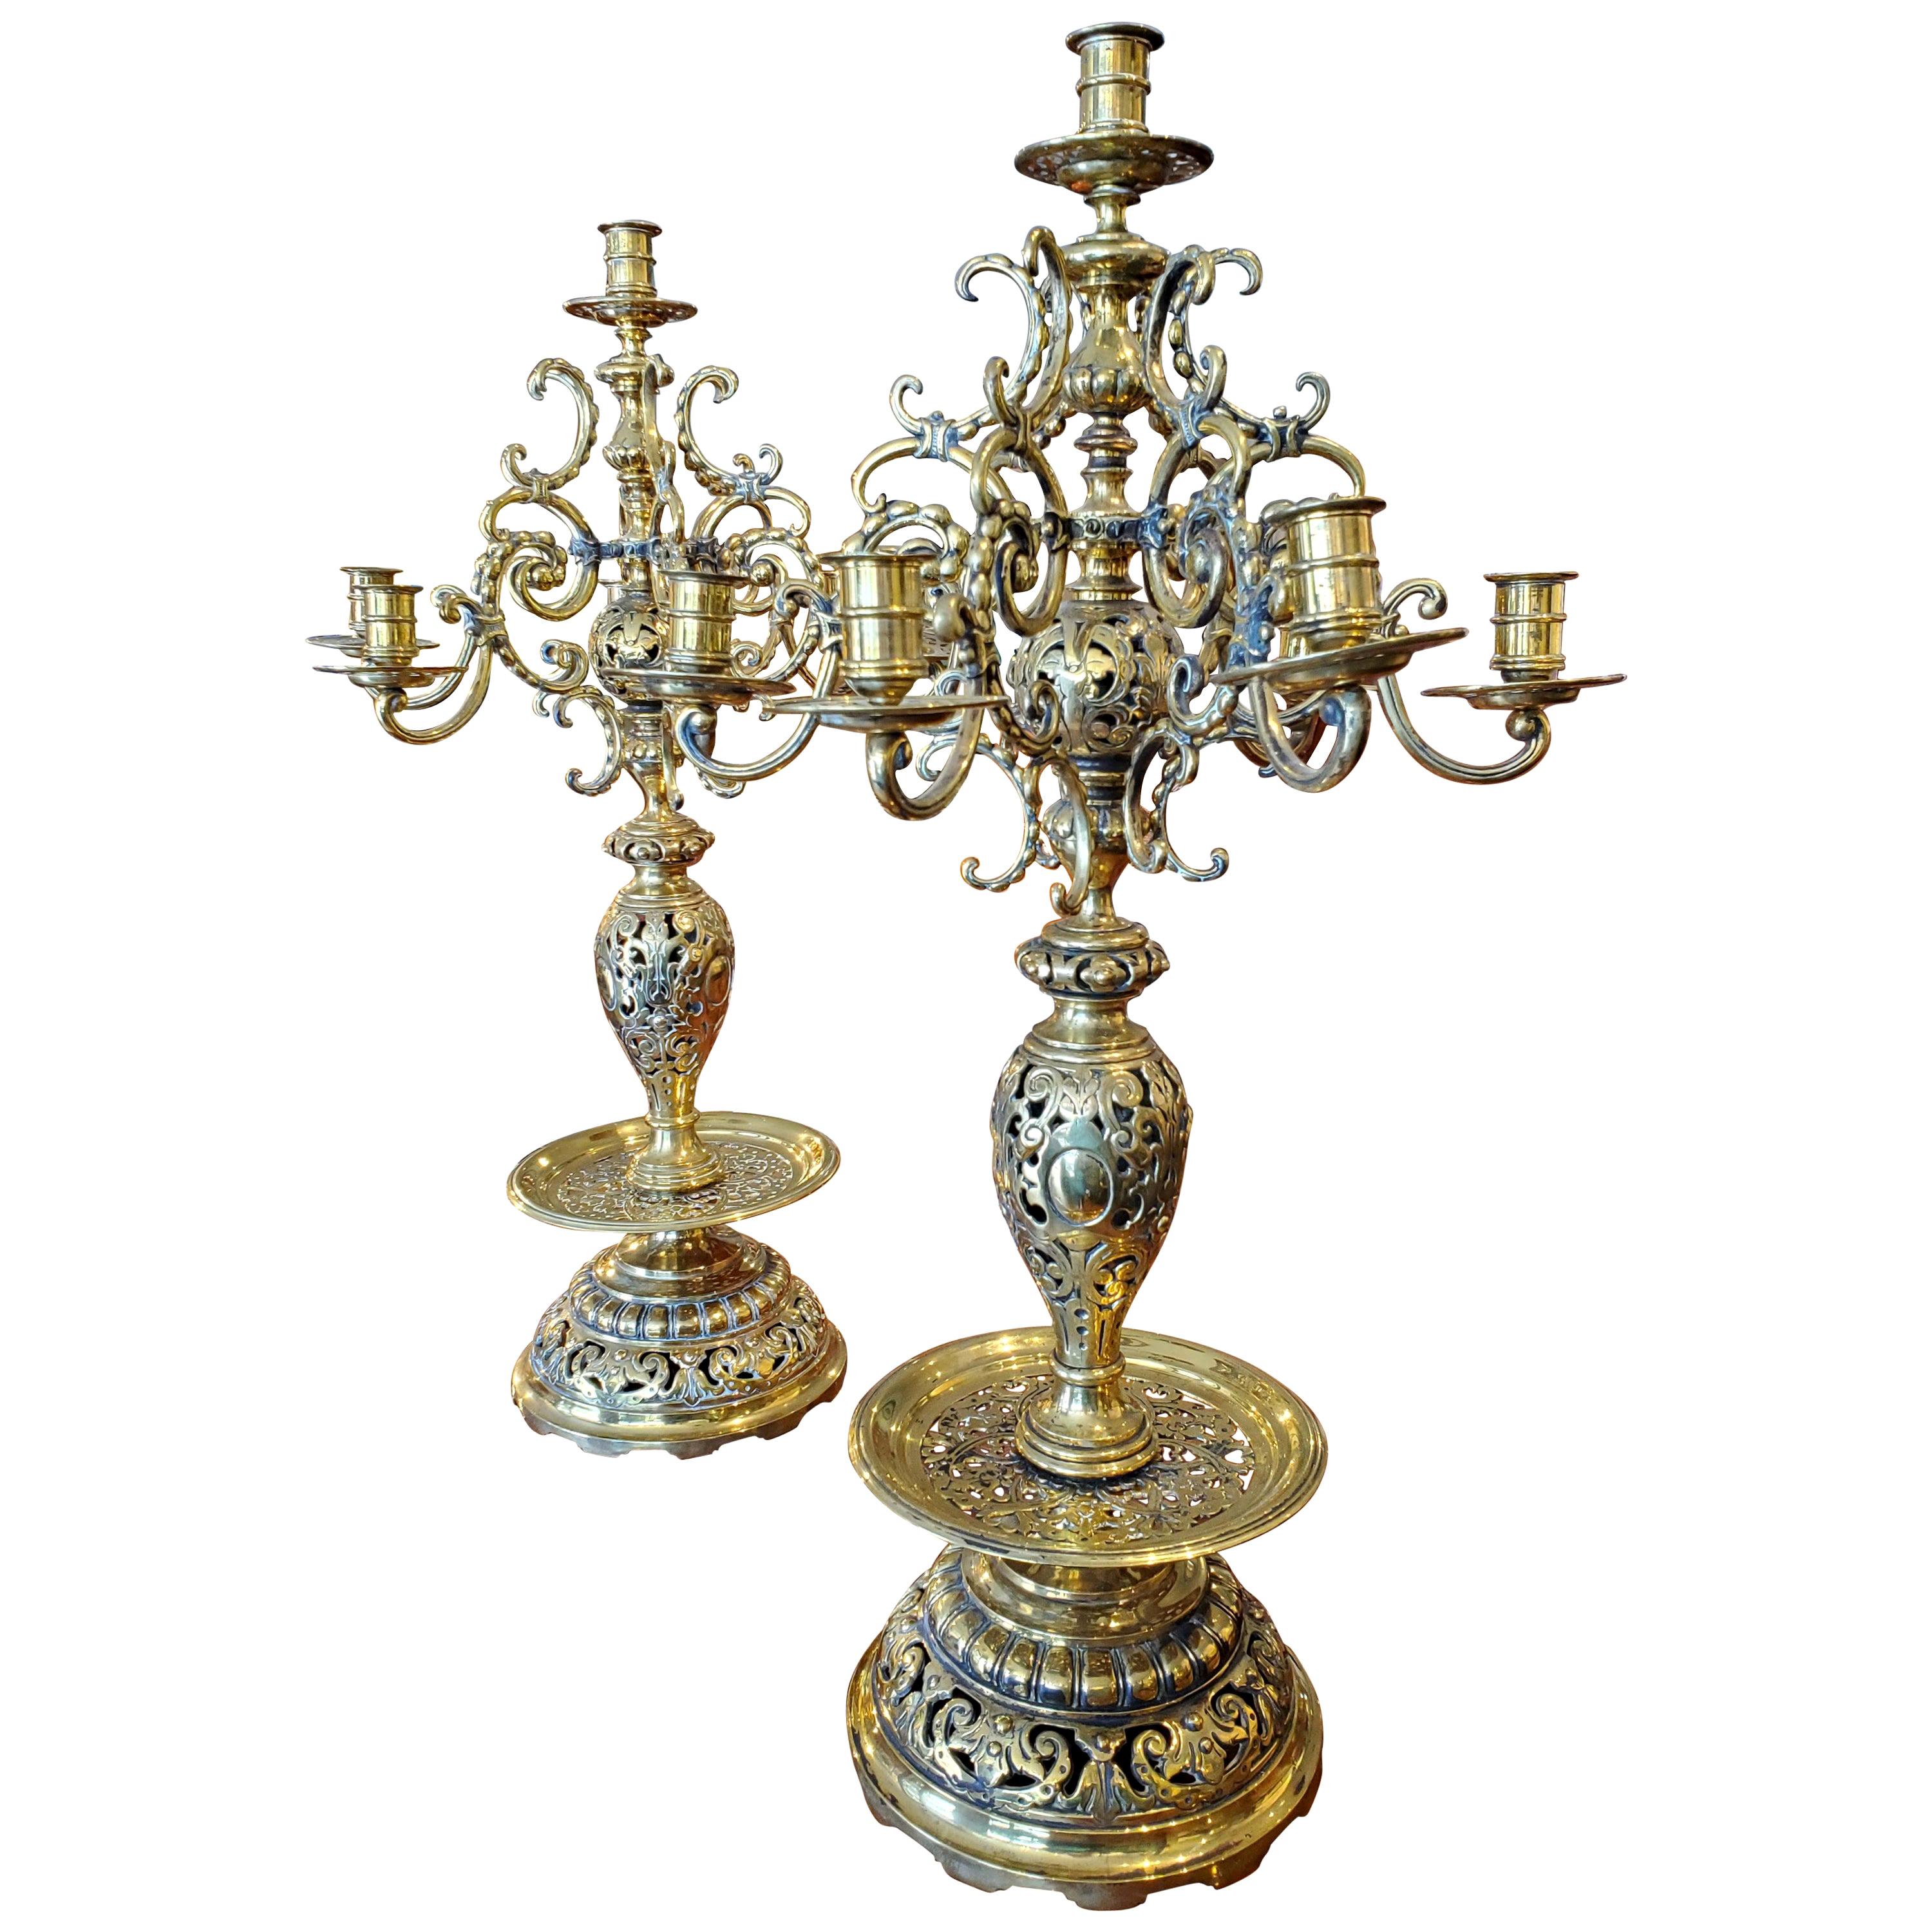 Large Pair of 19th Century Russian Brass Candelabra with Turkish Influence